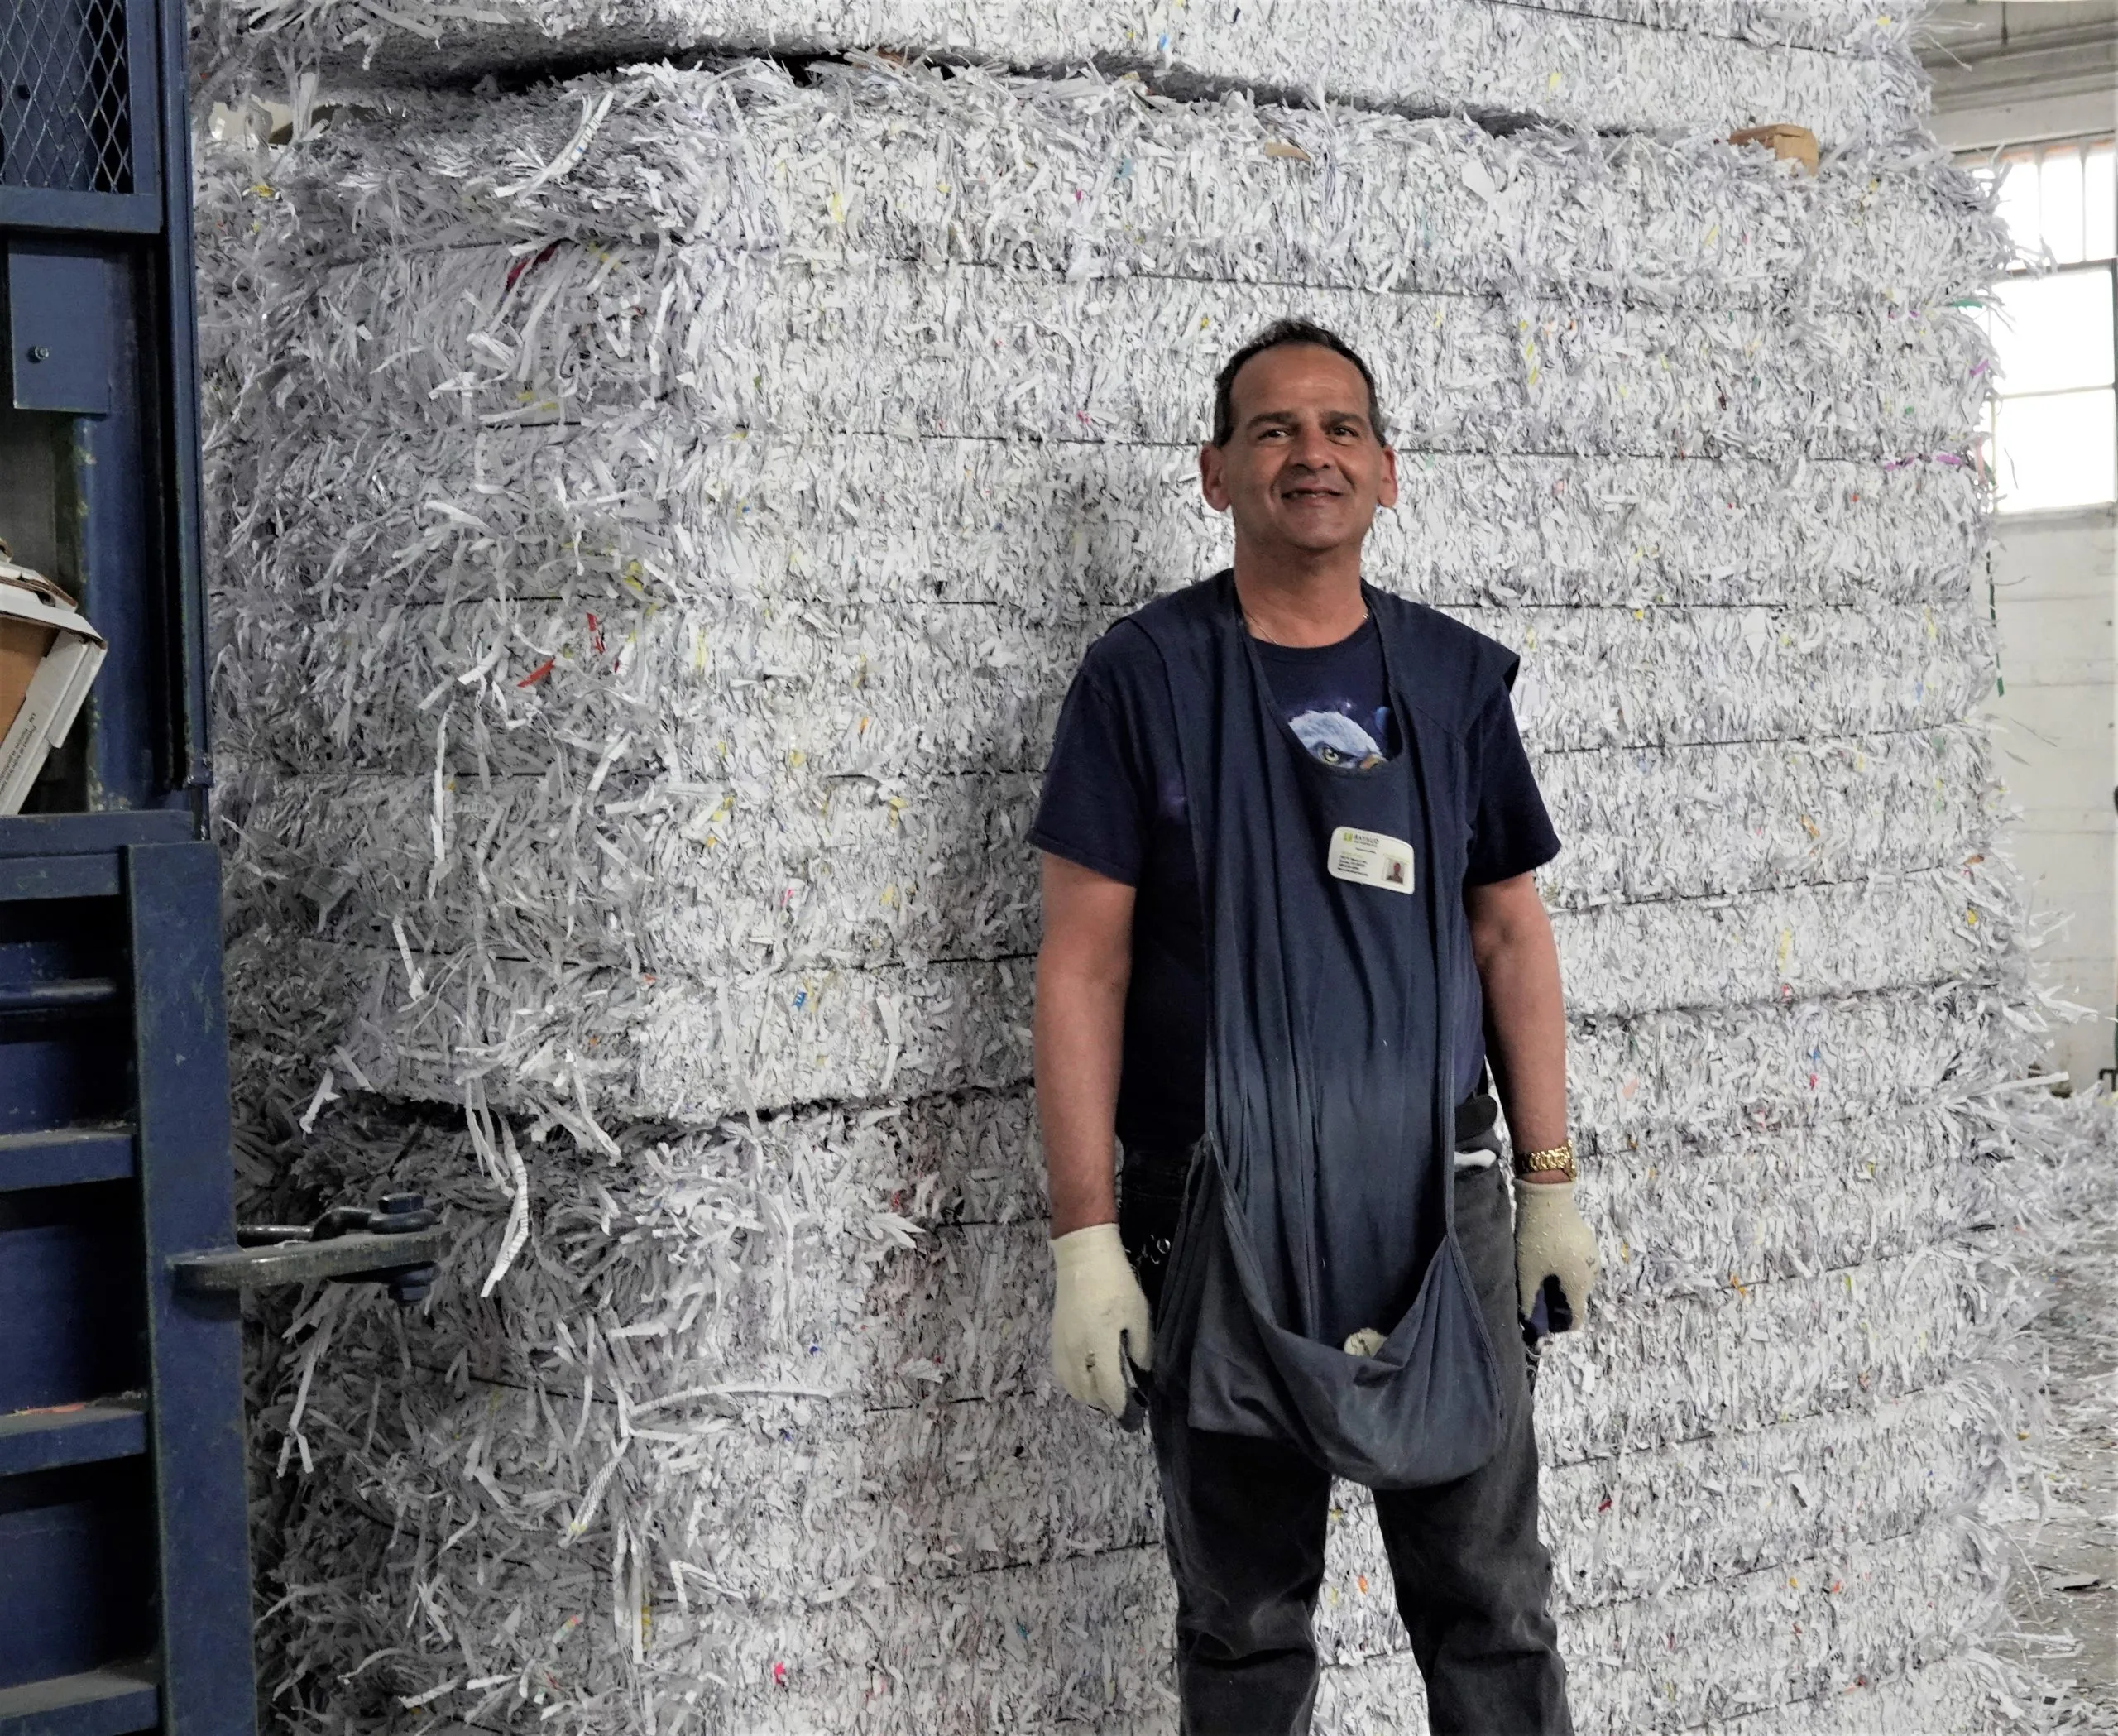 Happy worker in front of shredded documents